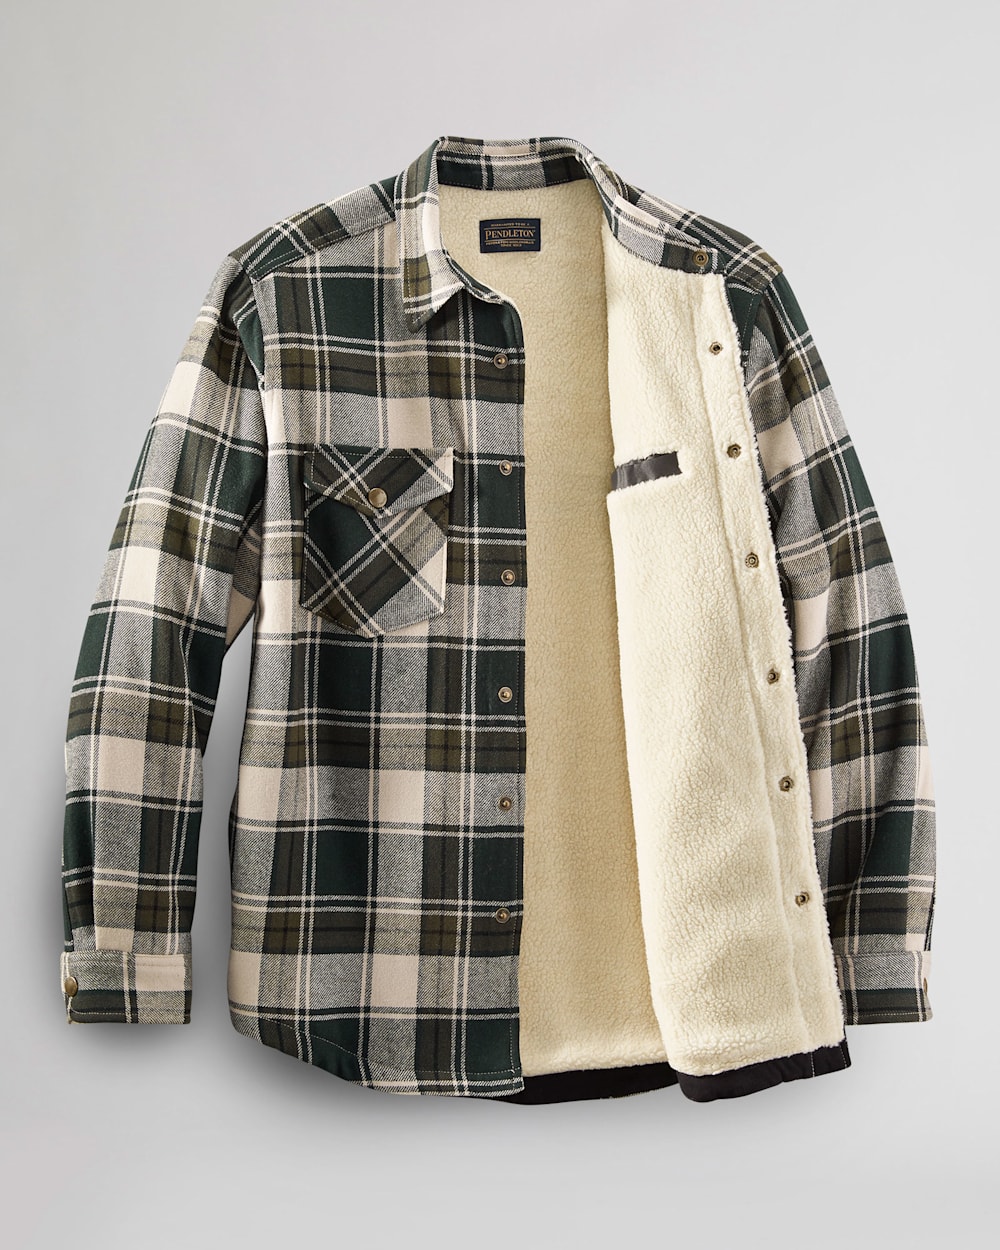 ALTERNATE VIEW OF MEN'S SHERPA-LINED WOOL SHIRT JACKET IN TAN/GREEN PLAID image number 2